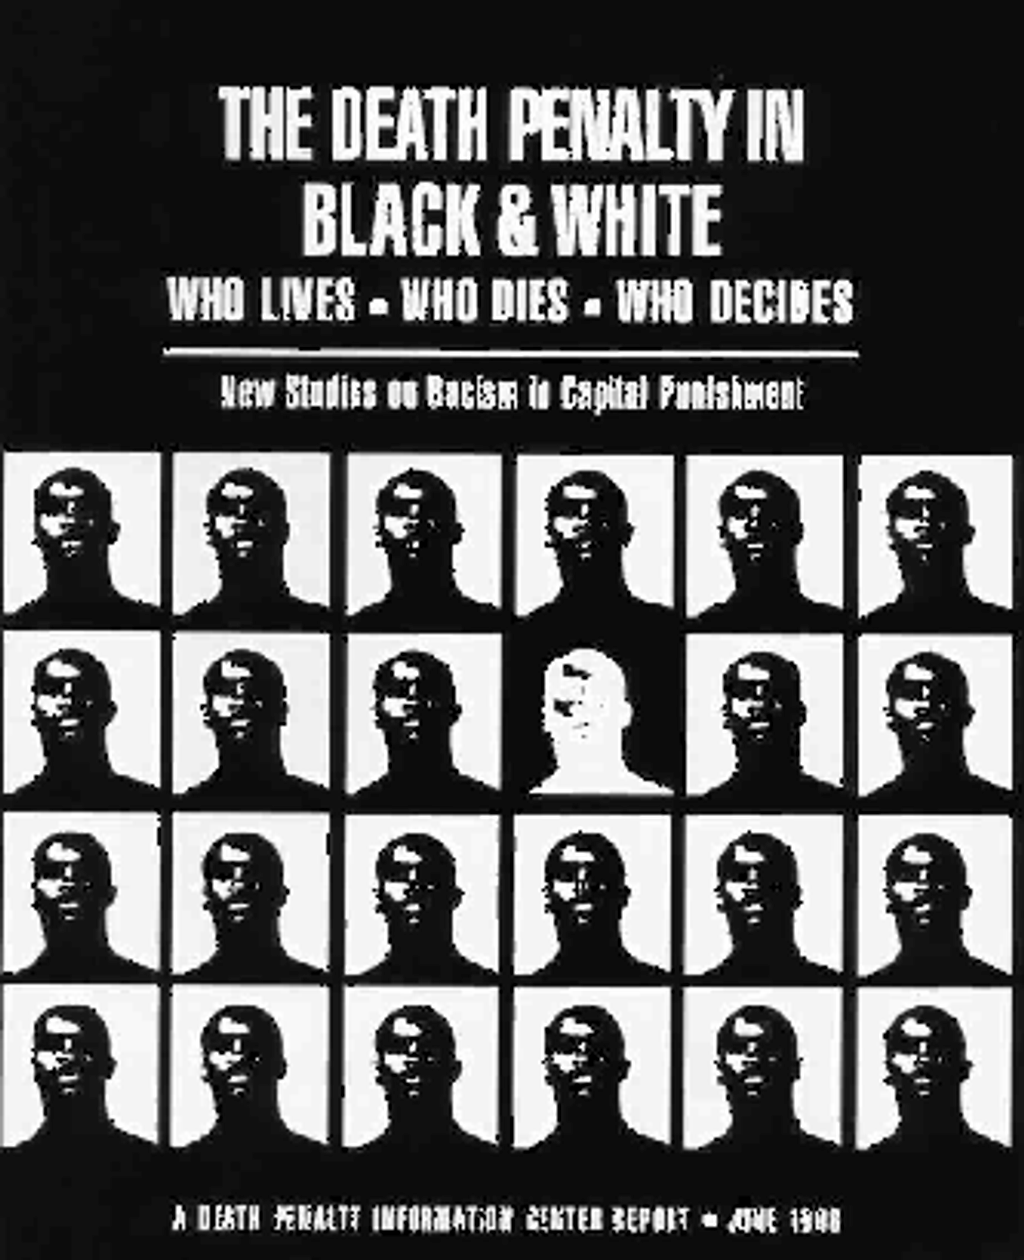 The Death Penalty in Black and White: Who Lives, Who Dies, Who Decides